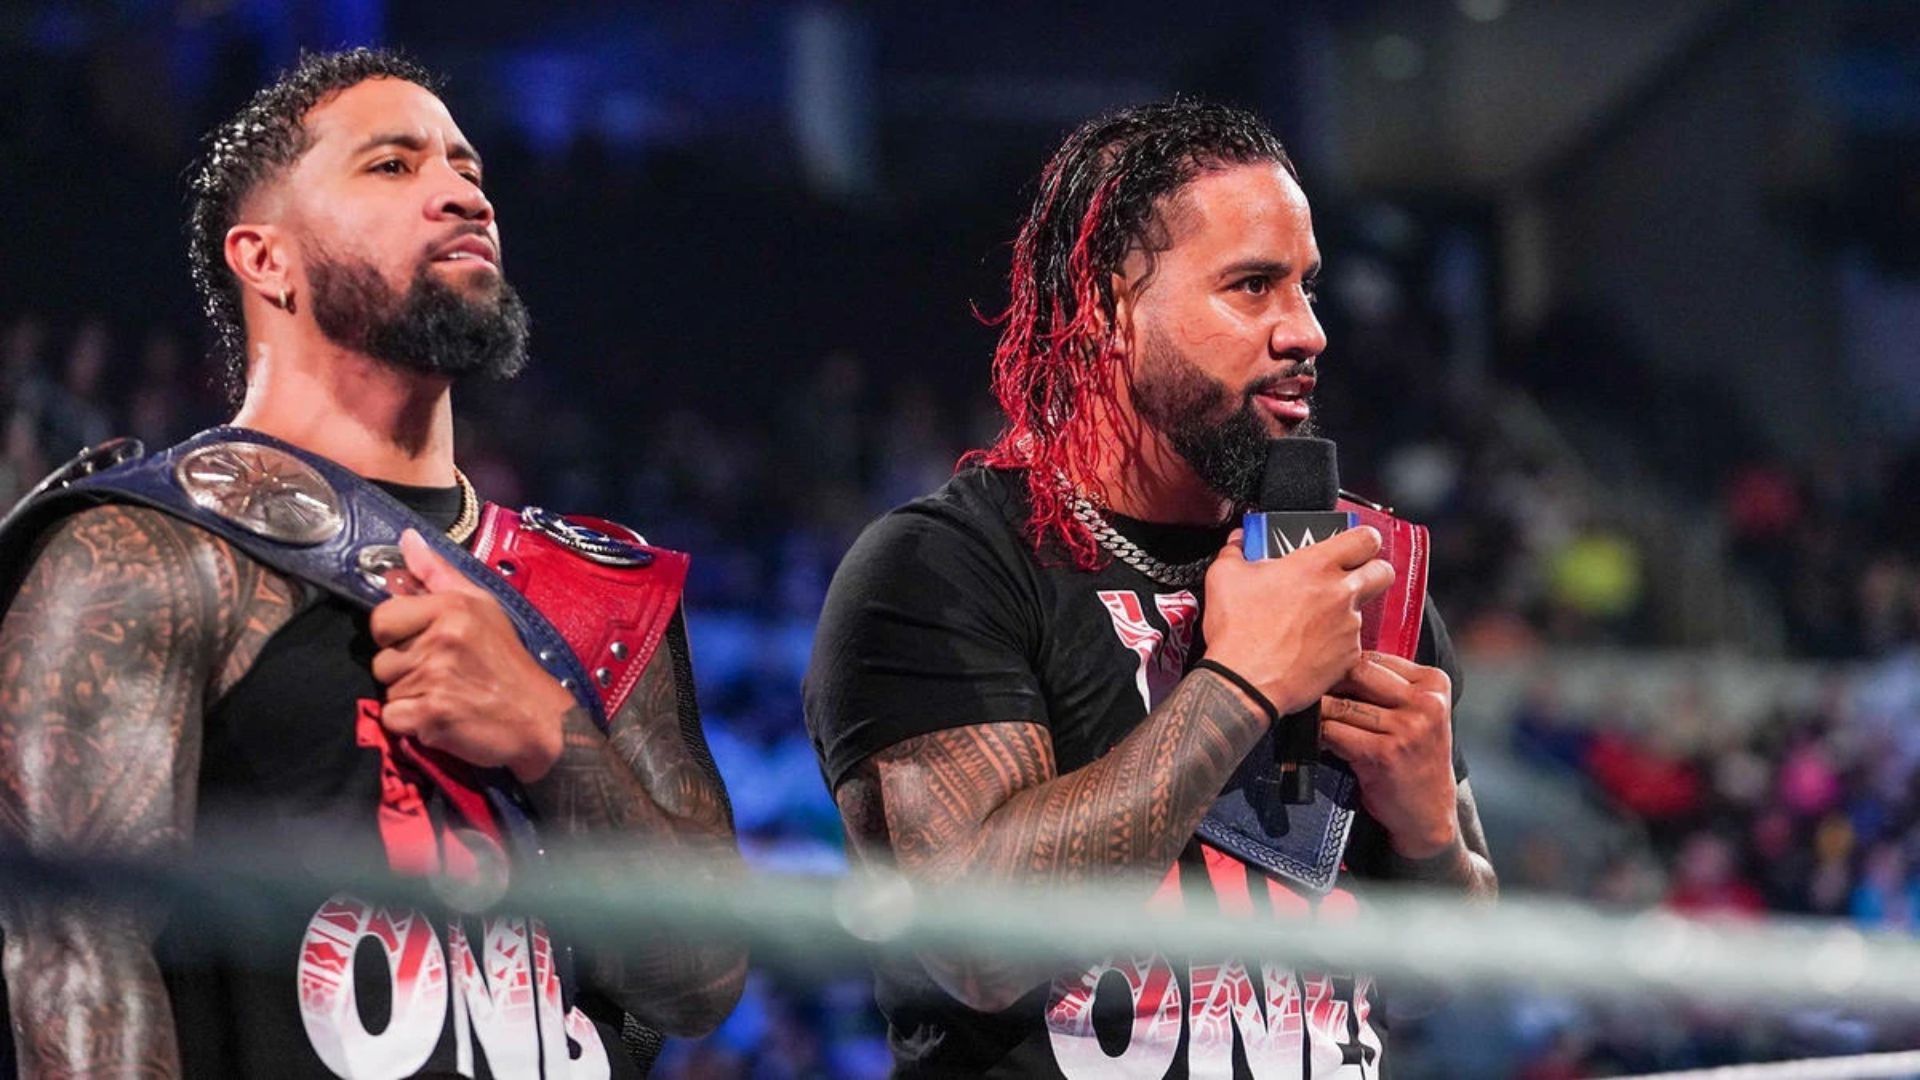 Longest reigning WWE tag team champions The Usos